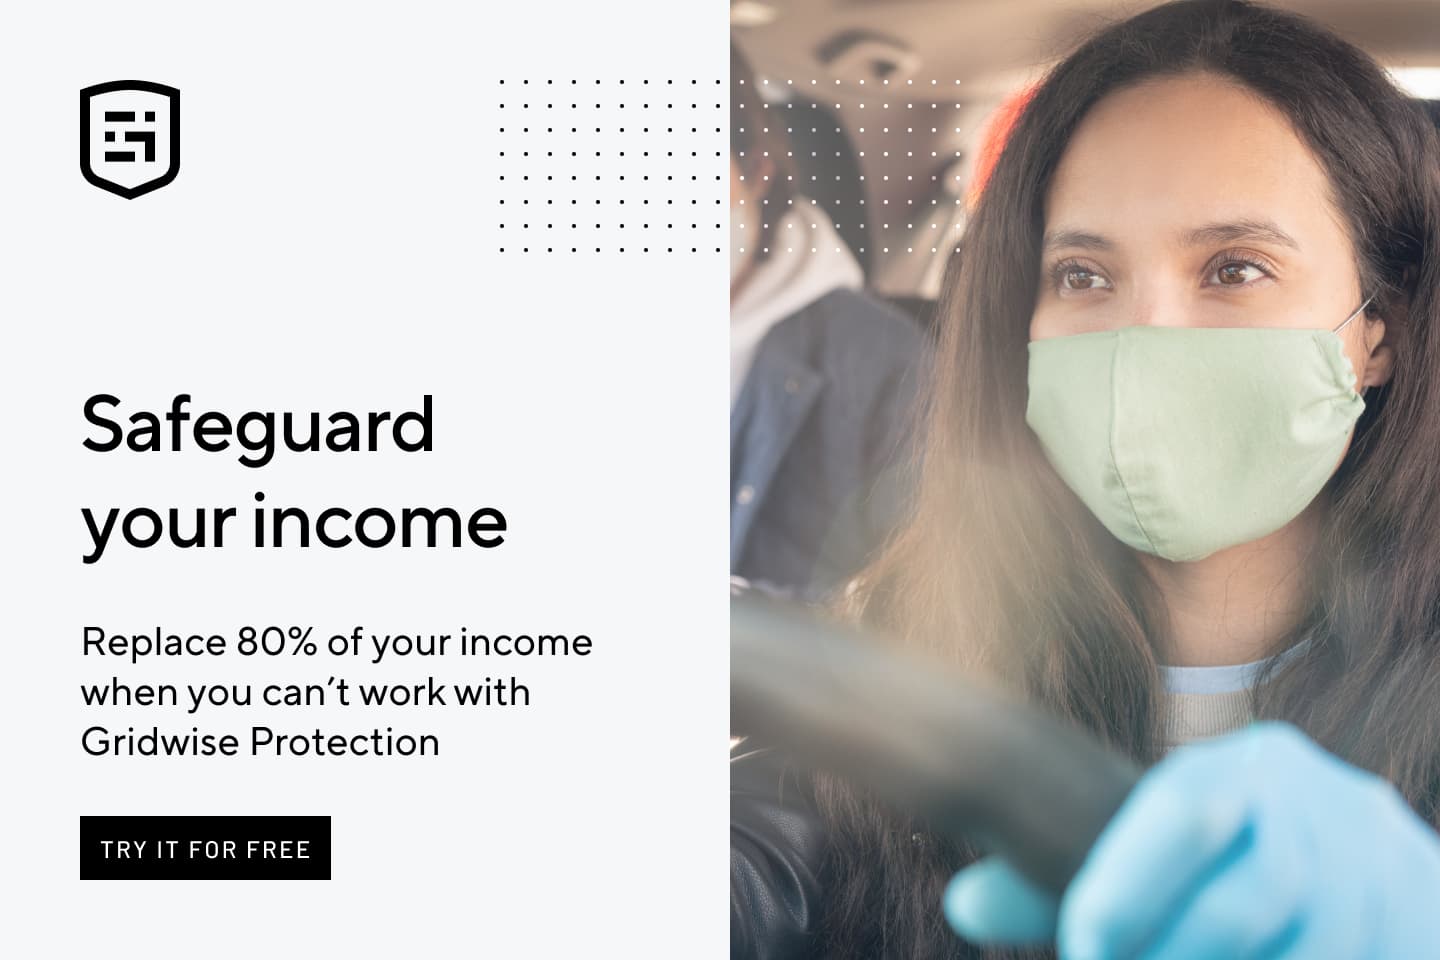 Safeguard your income. Replace 80% of your income when you can't work with Gridwise Protection.